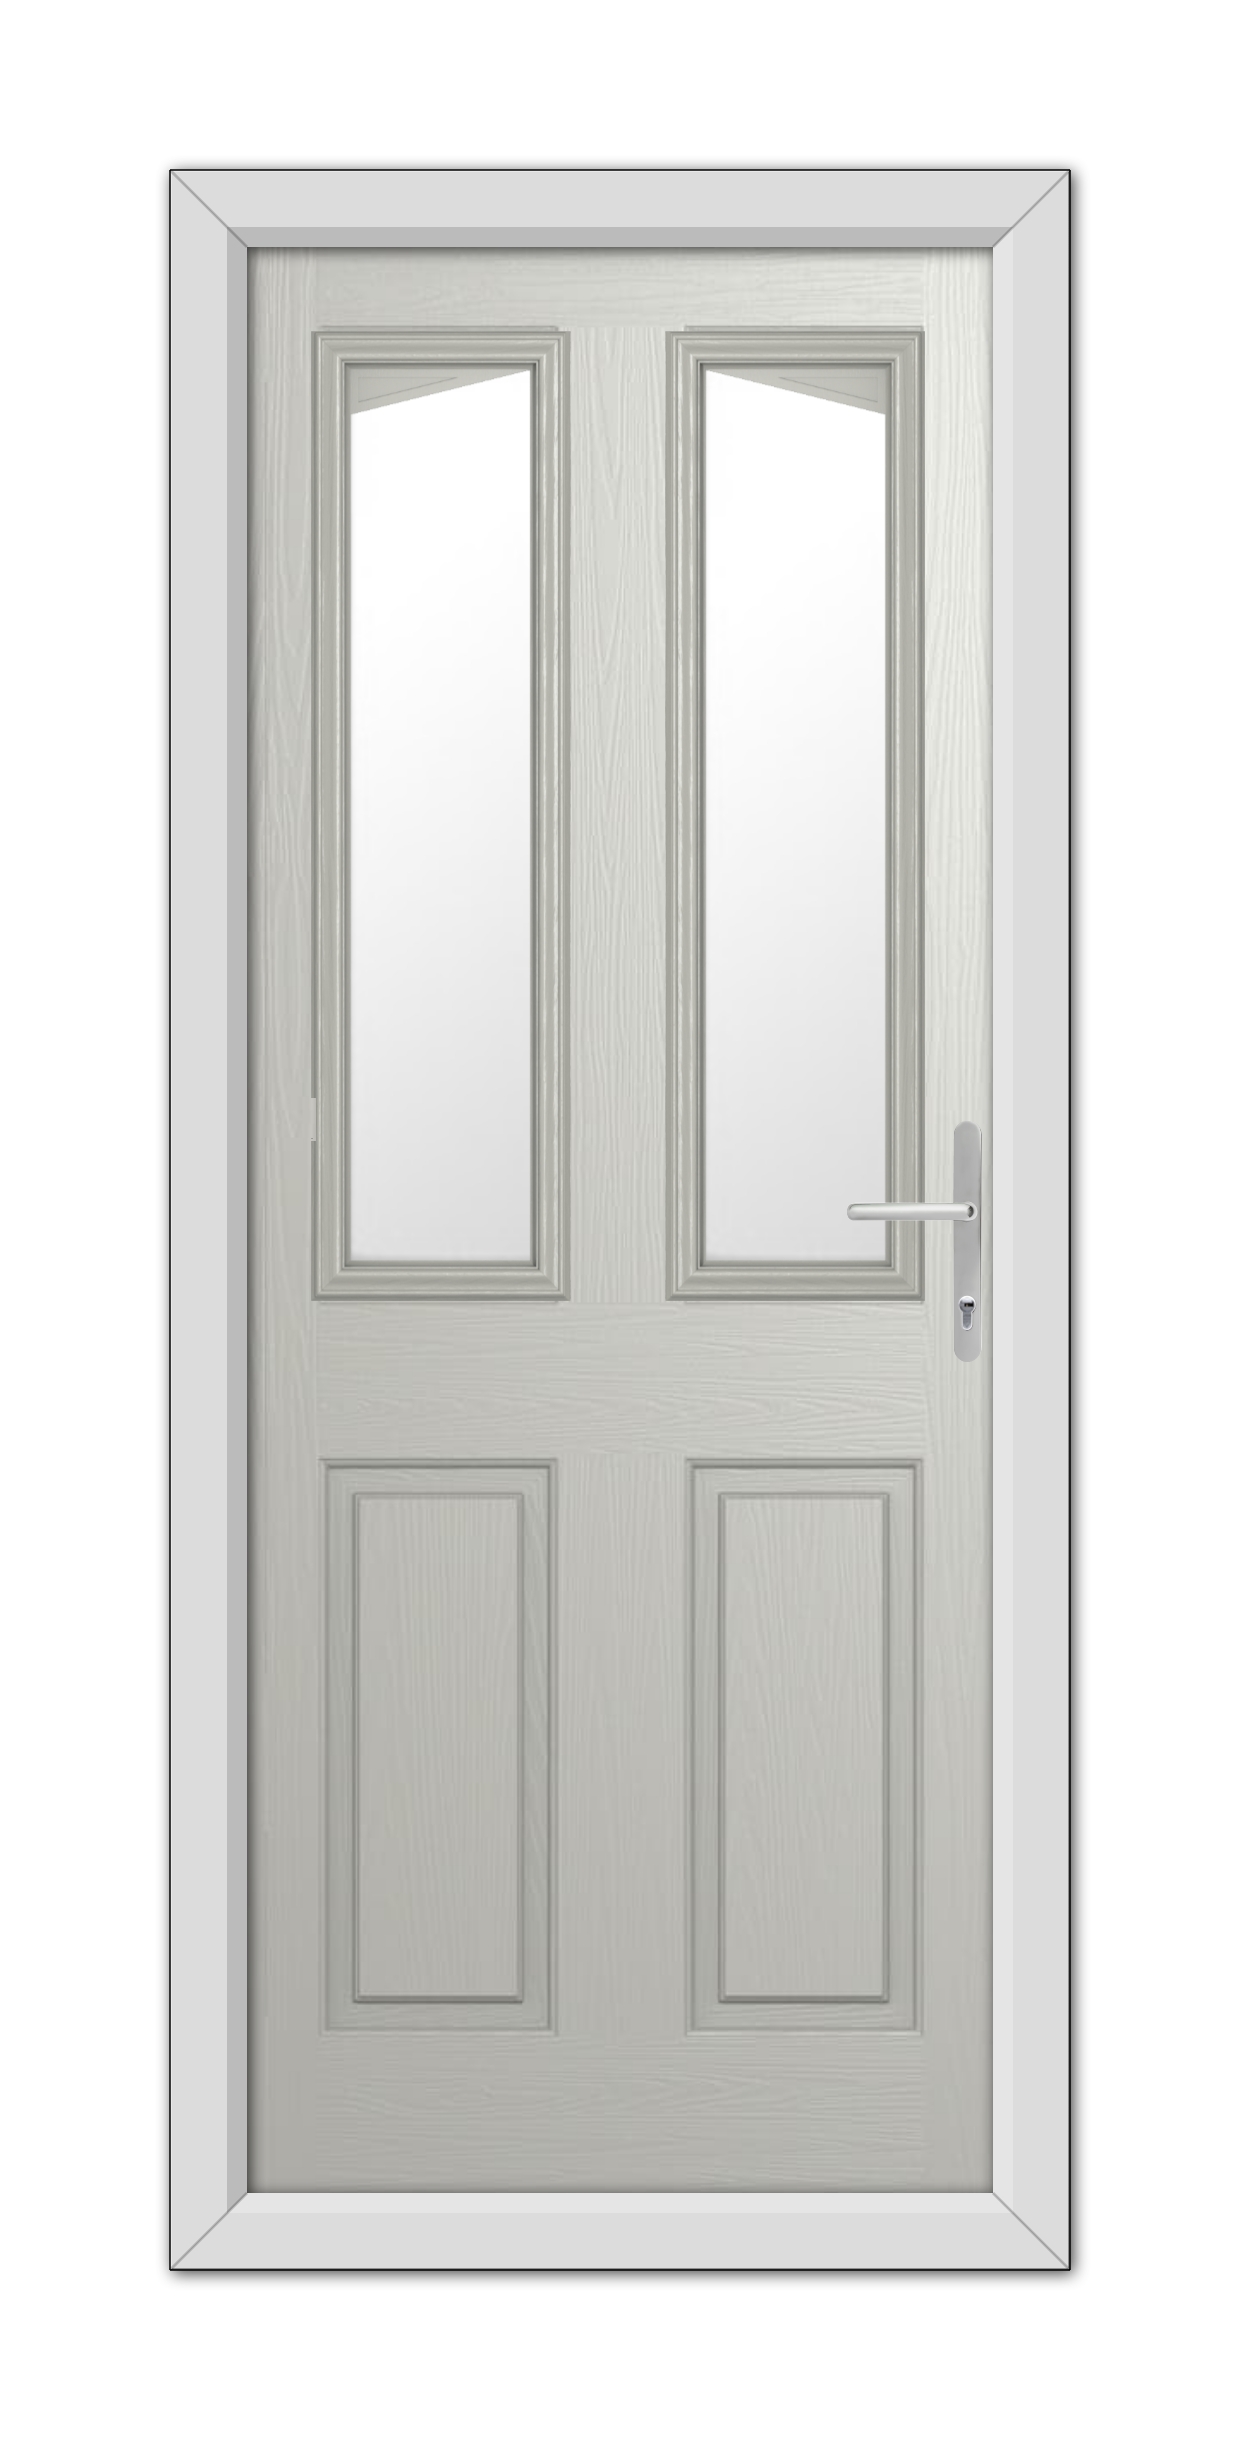 A modern Agate Grey Highbury Composite Door 48mm Timber Core with upper half glass panels, a silver handle on the right, and framed within a white door frame.